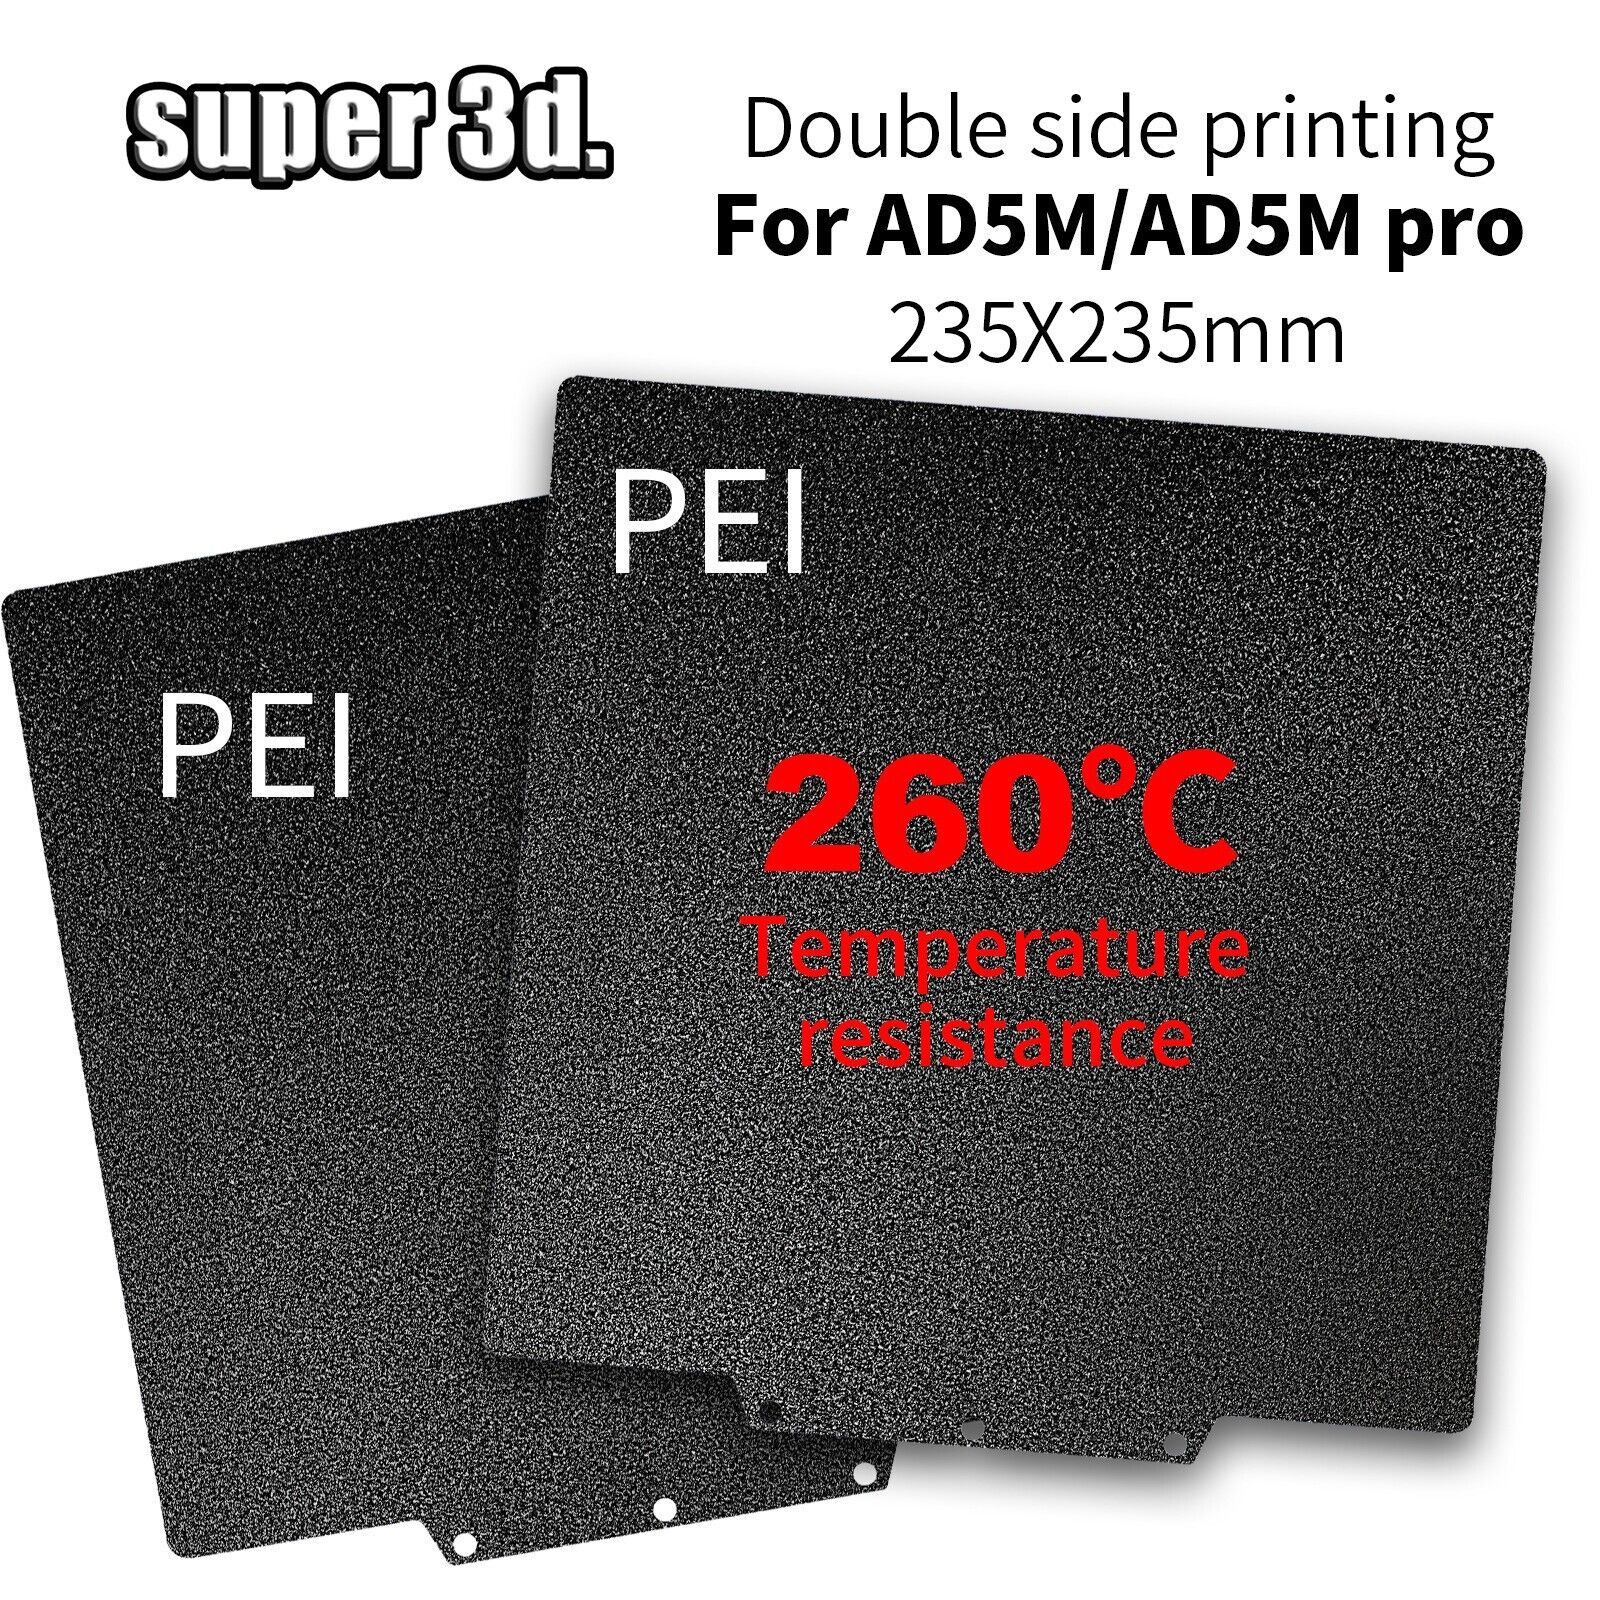 super_3d New Double Sided Textured Black PEI Build Plate 235mm for AD5M/AD5M pro